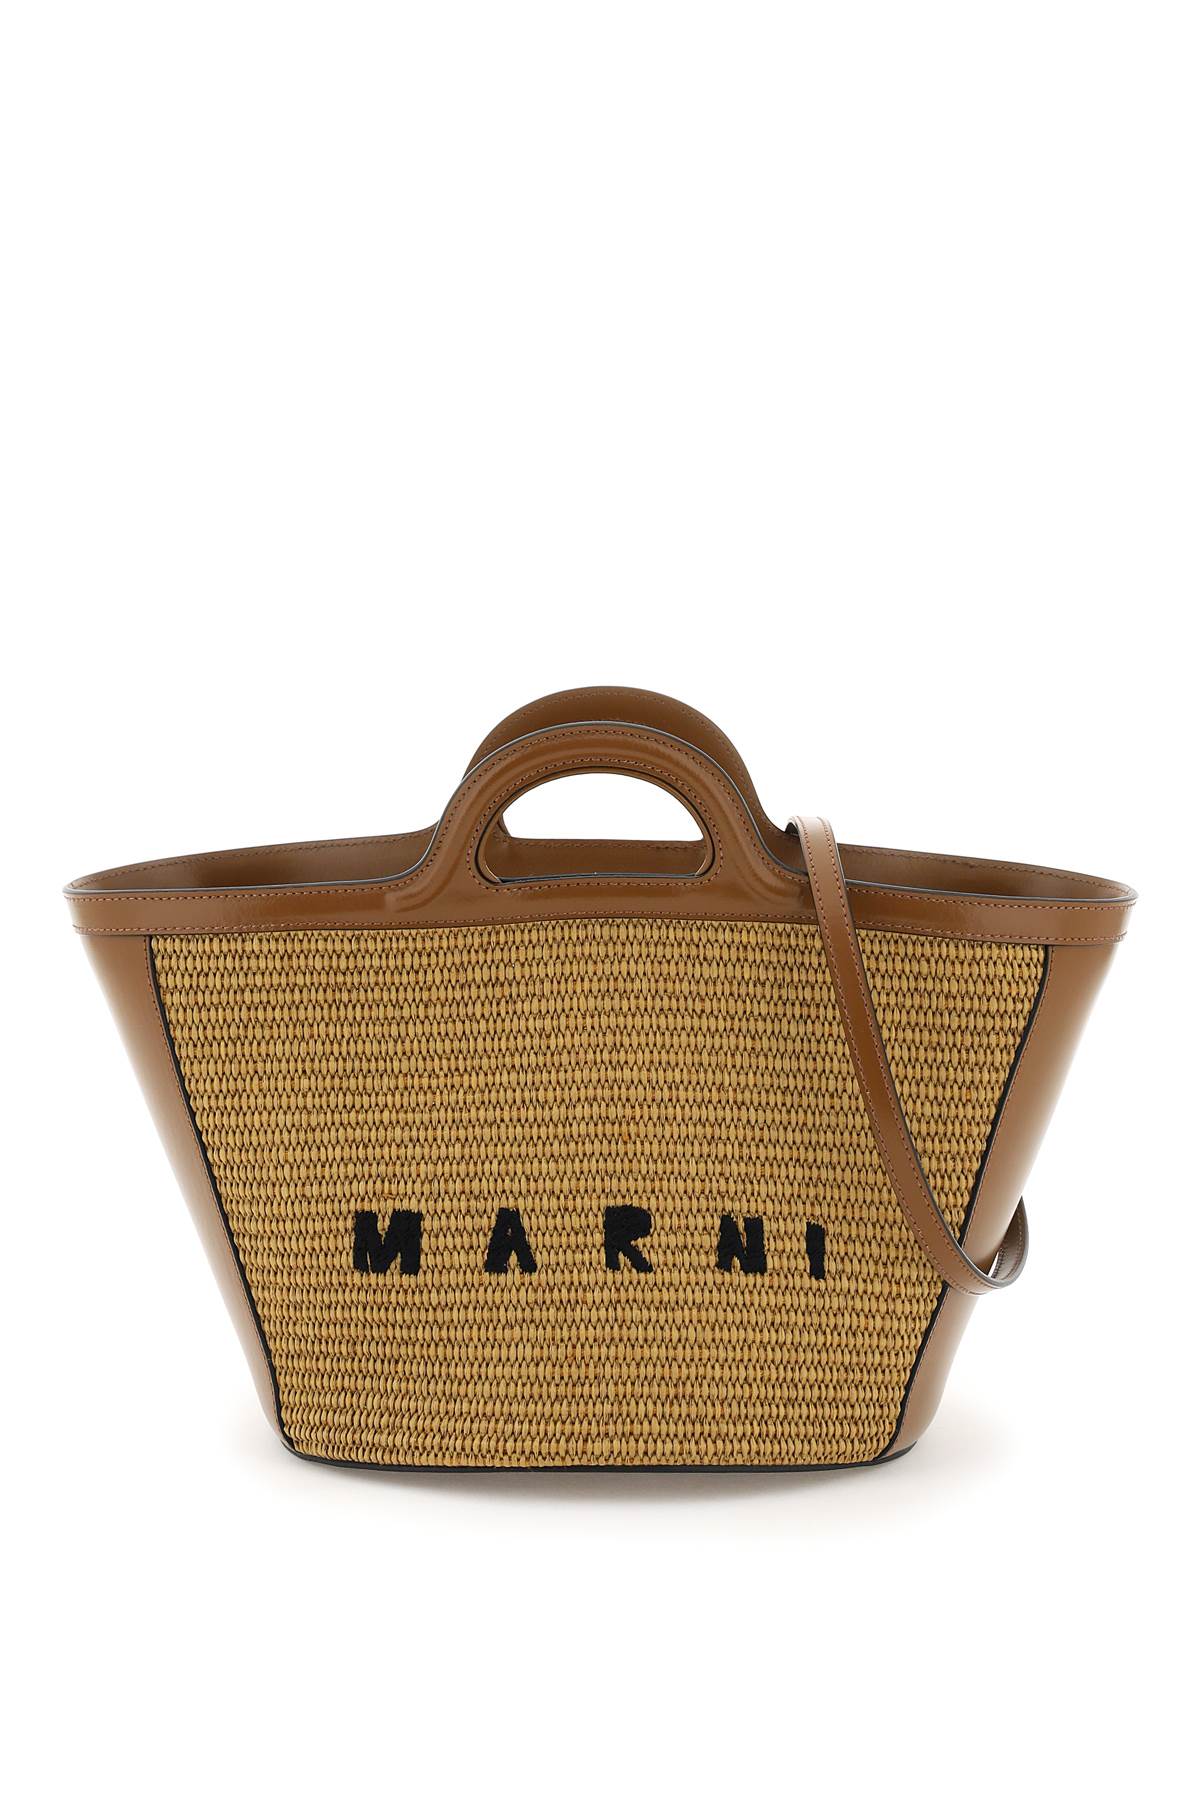 Brown Leather Blend Tropical Bag